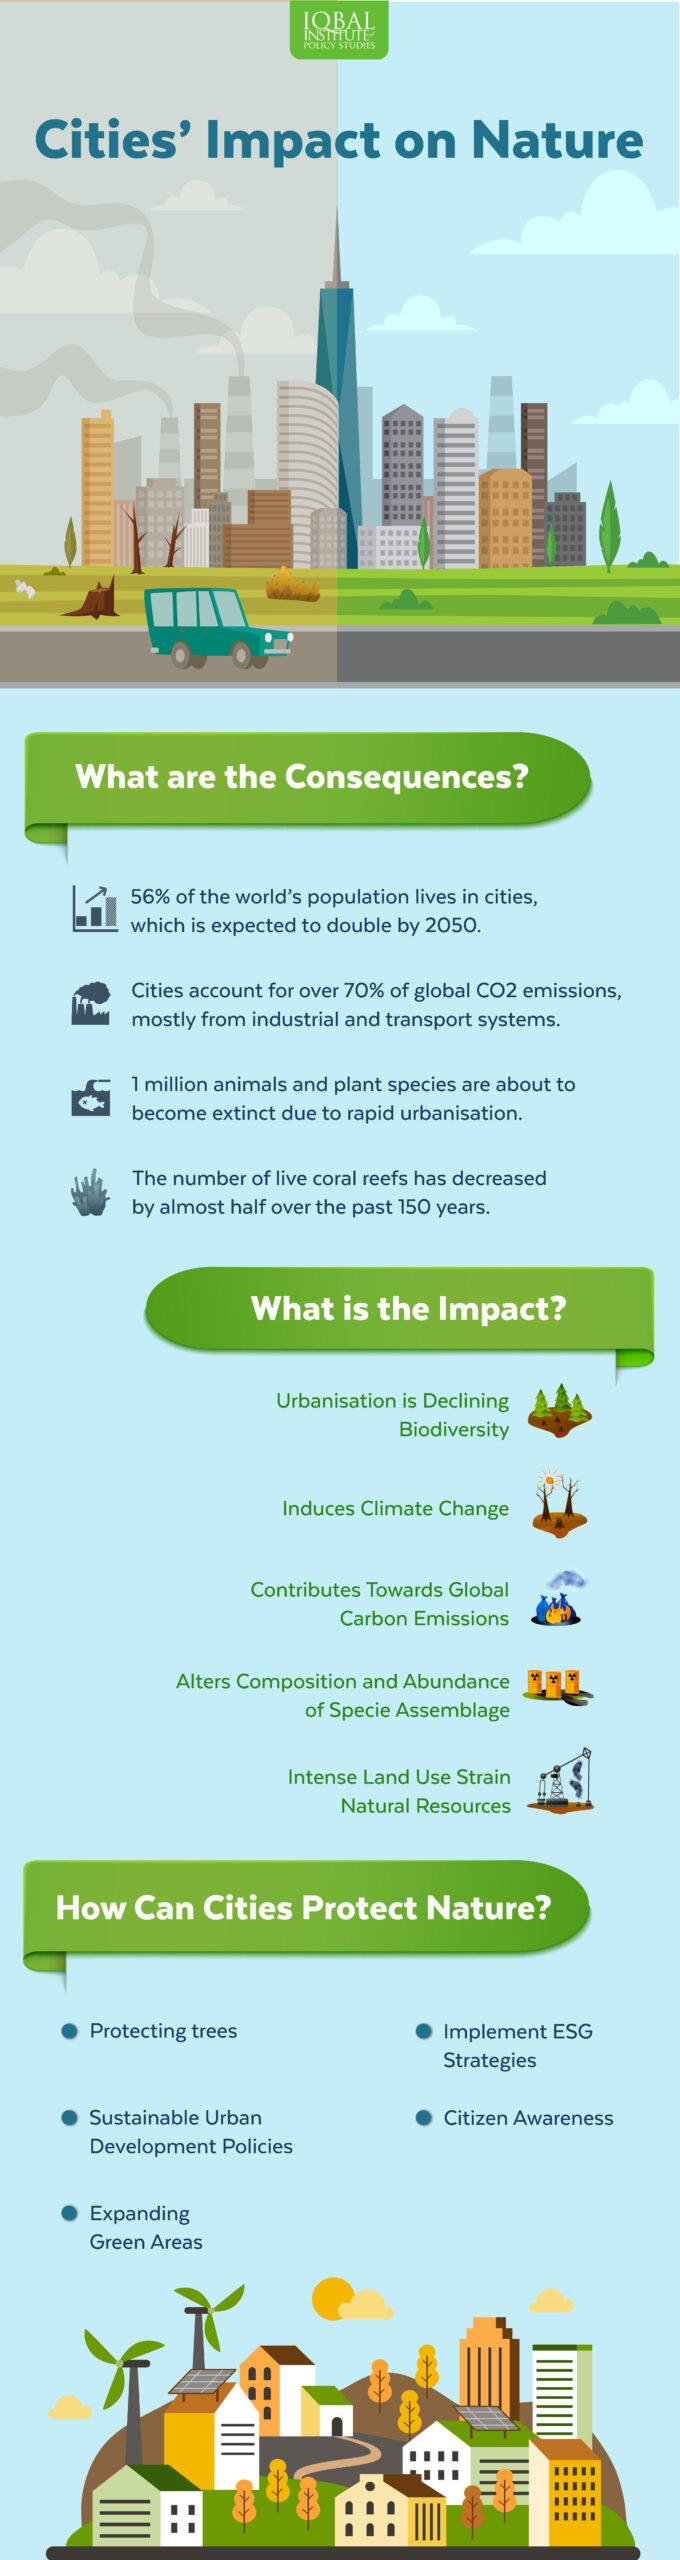 Cities' Impact on Nature